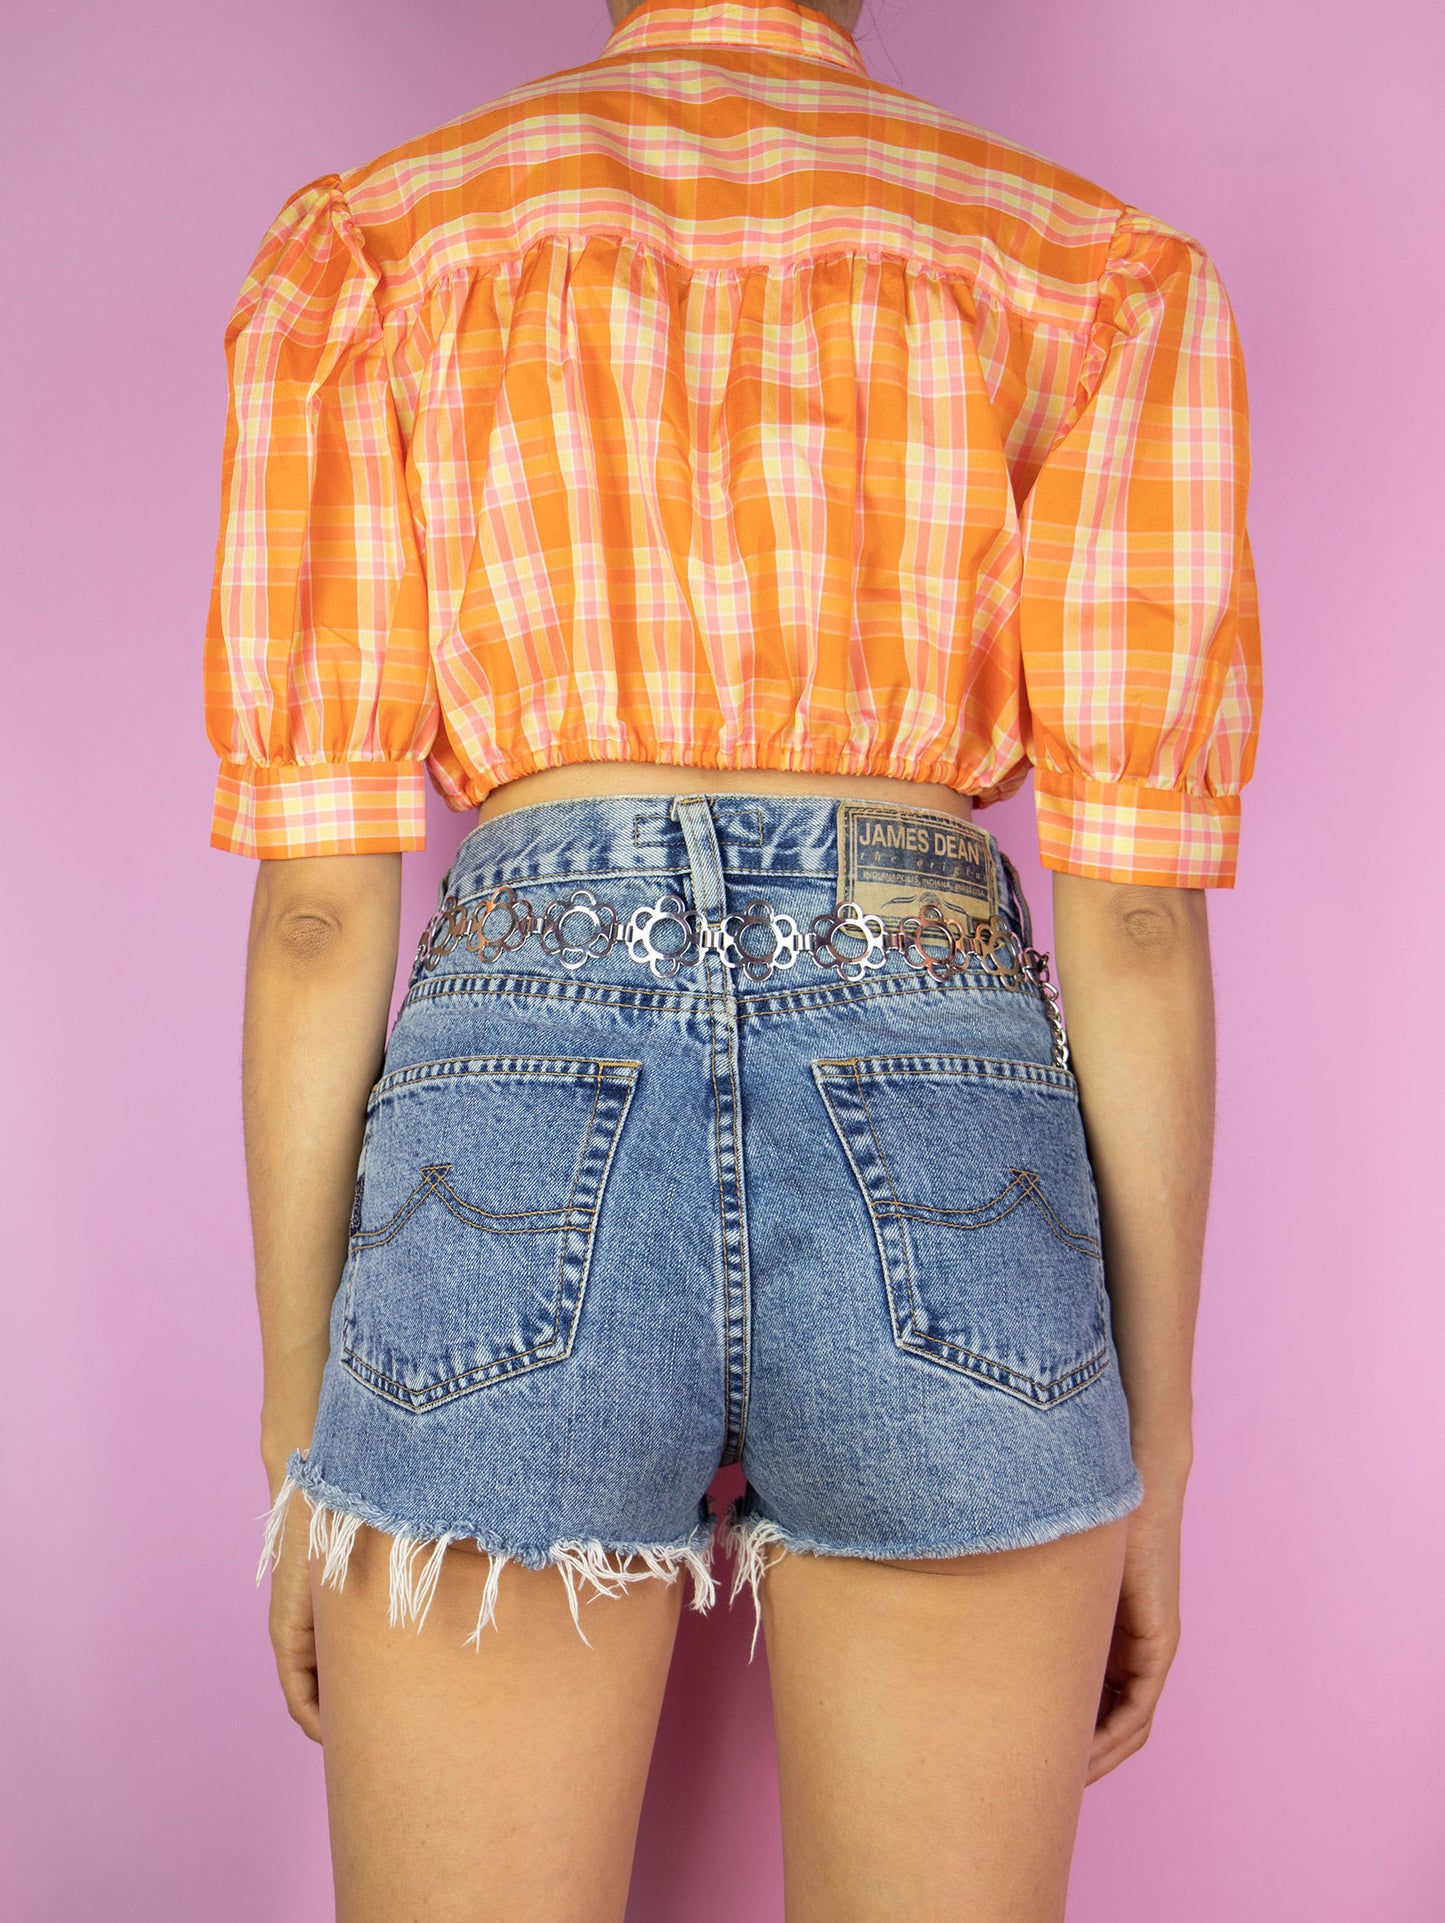 The Y2K Orange Plaid Crop Top is a vintage checkered cropped shirt with a collar, buttons, and puff sleeves. Cottage prairie 2000s country western summer gingham blouse.